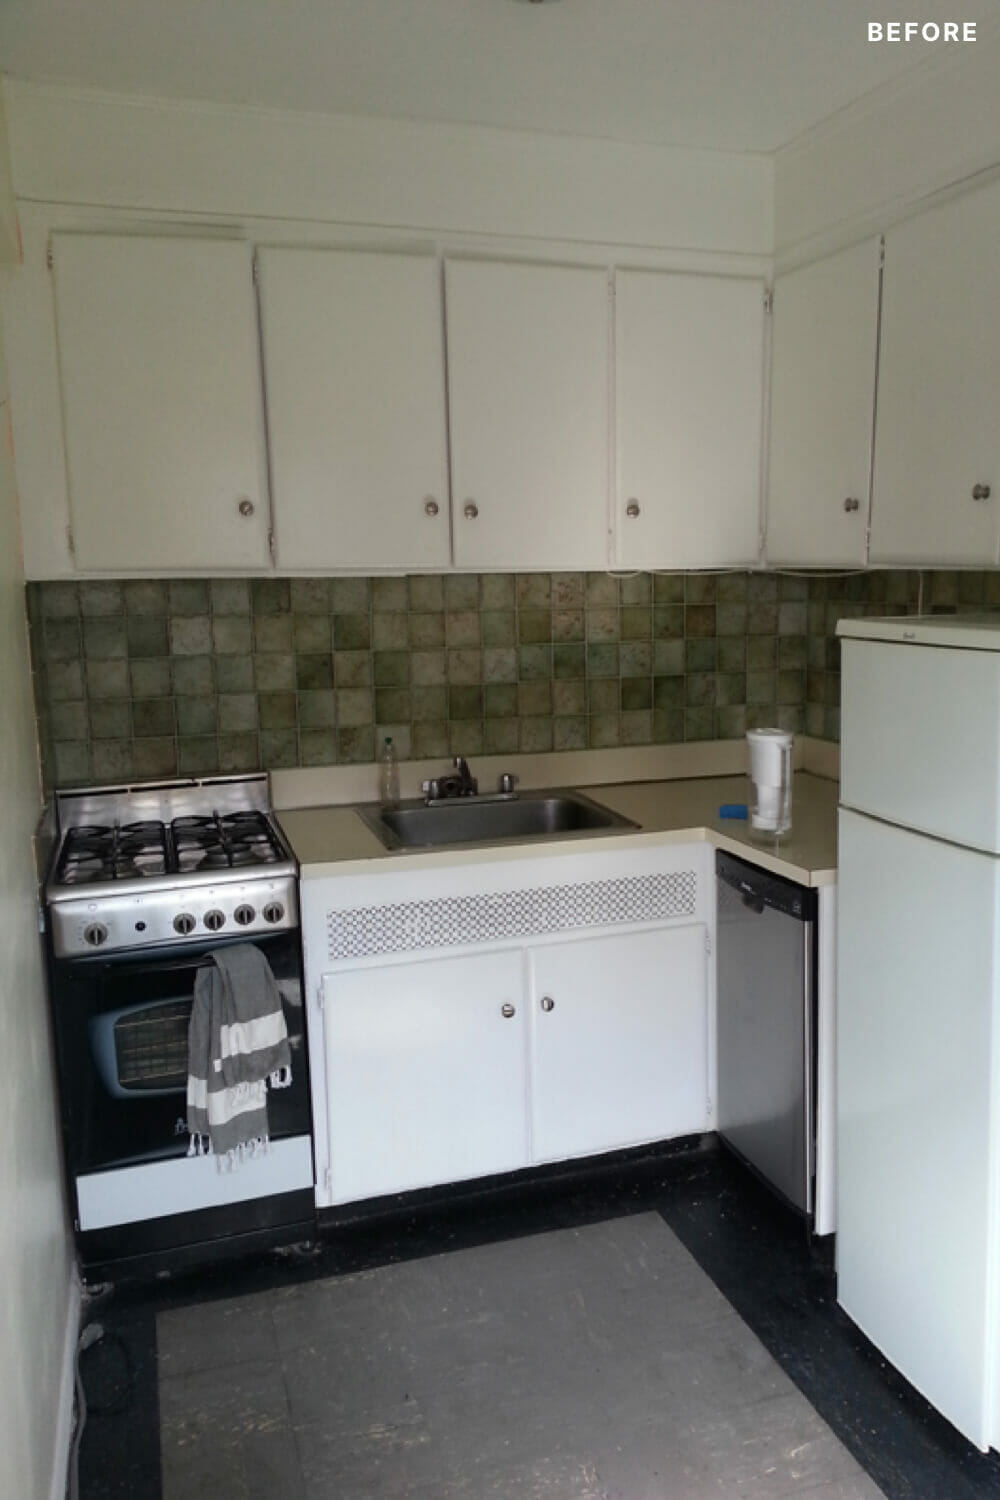 small kitchen with white cabinets and square backsplash tiles and black floor before renovation